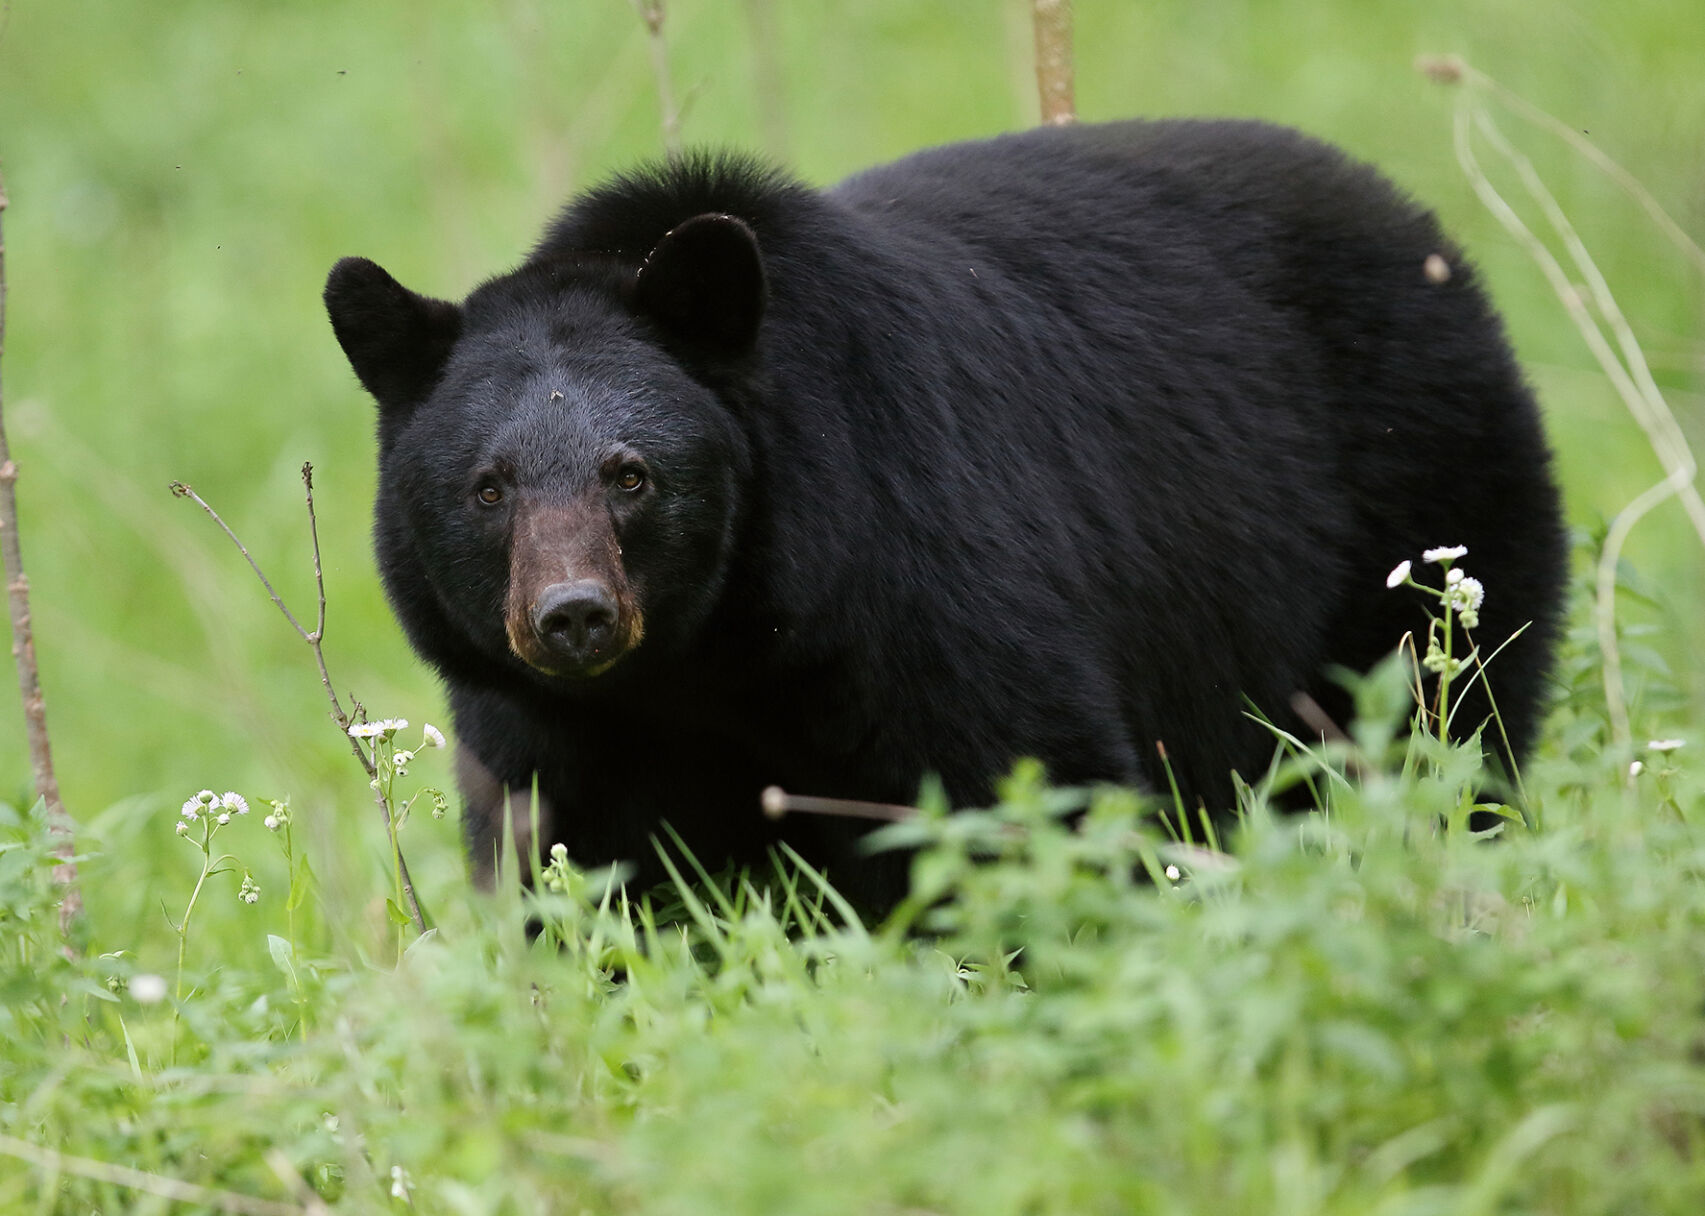 Outdoors Pennsylvania Game Commission releases 2022 bear harvest